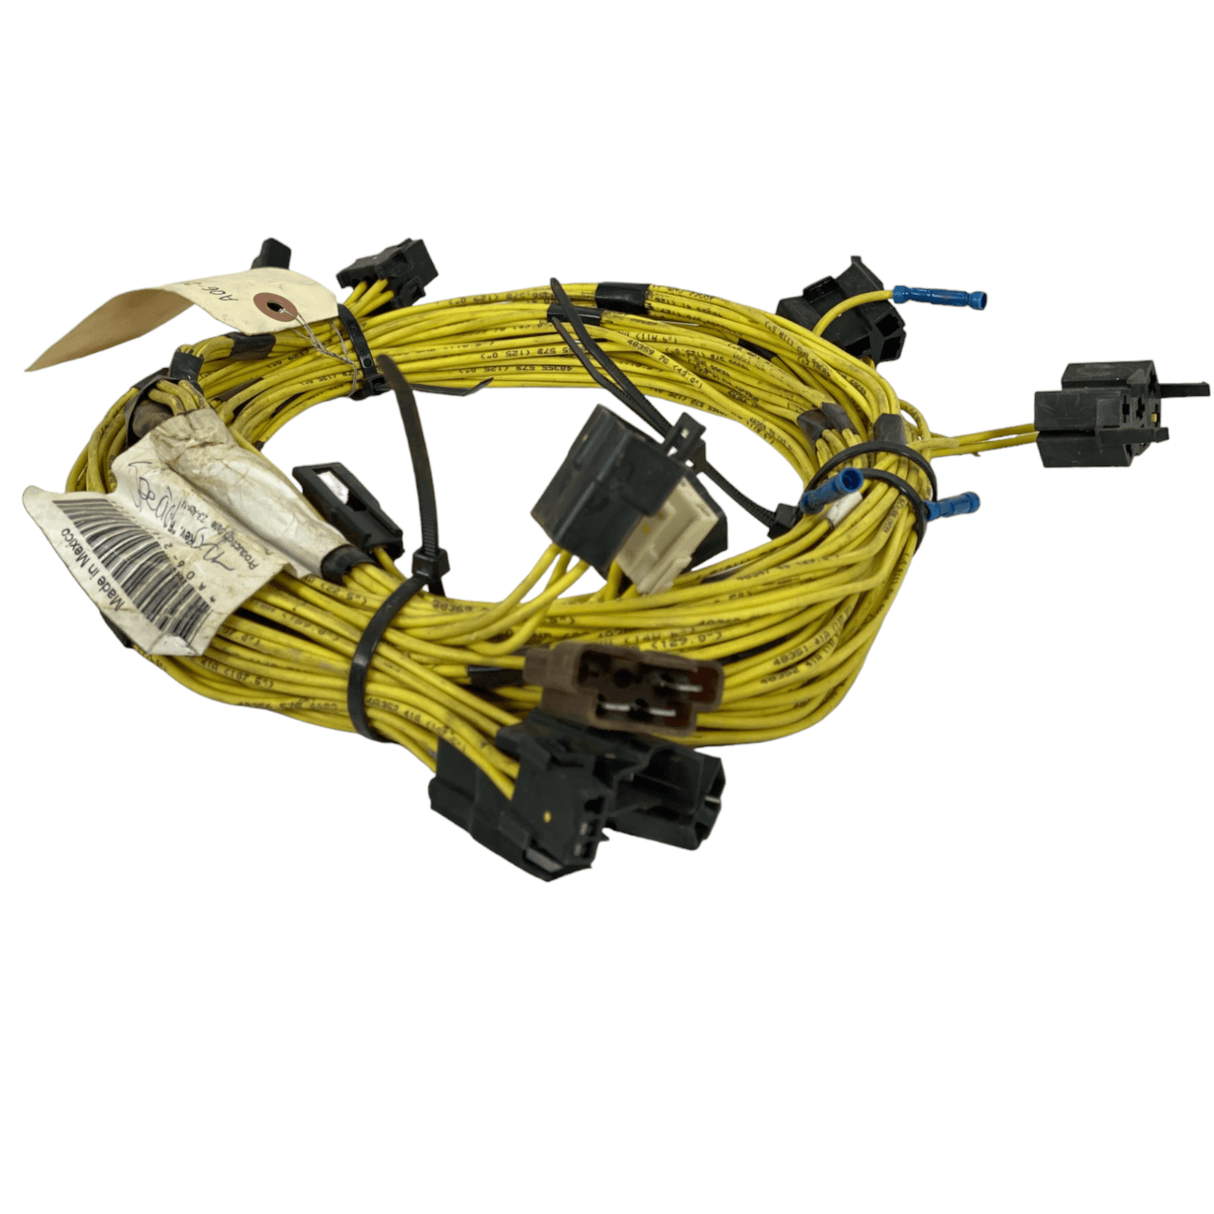 A06-21621-000 Genuine Freightliner® 70 Rr Harness -Ovhd A0621621000 - Truck To Trailer